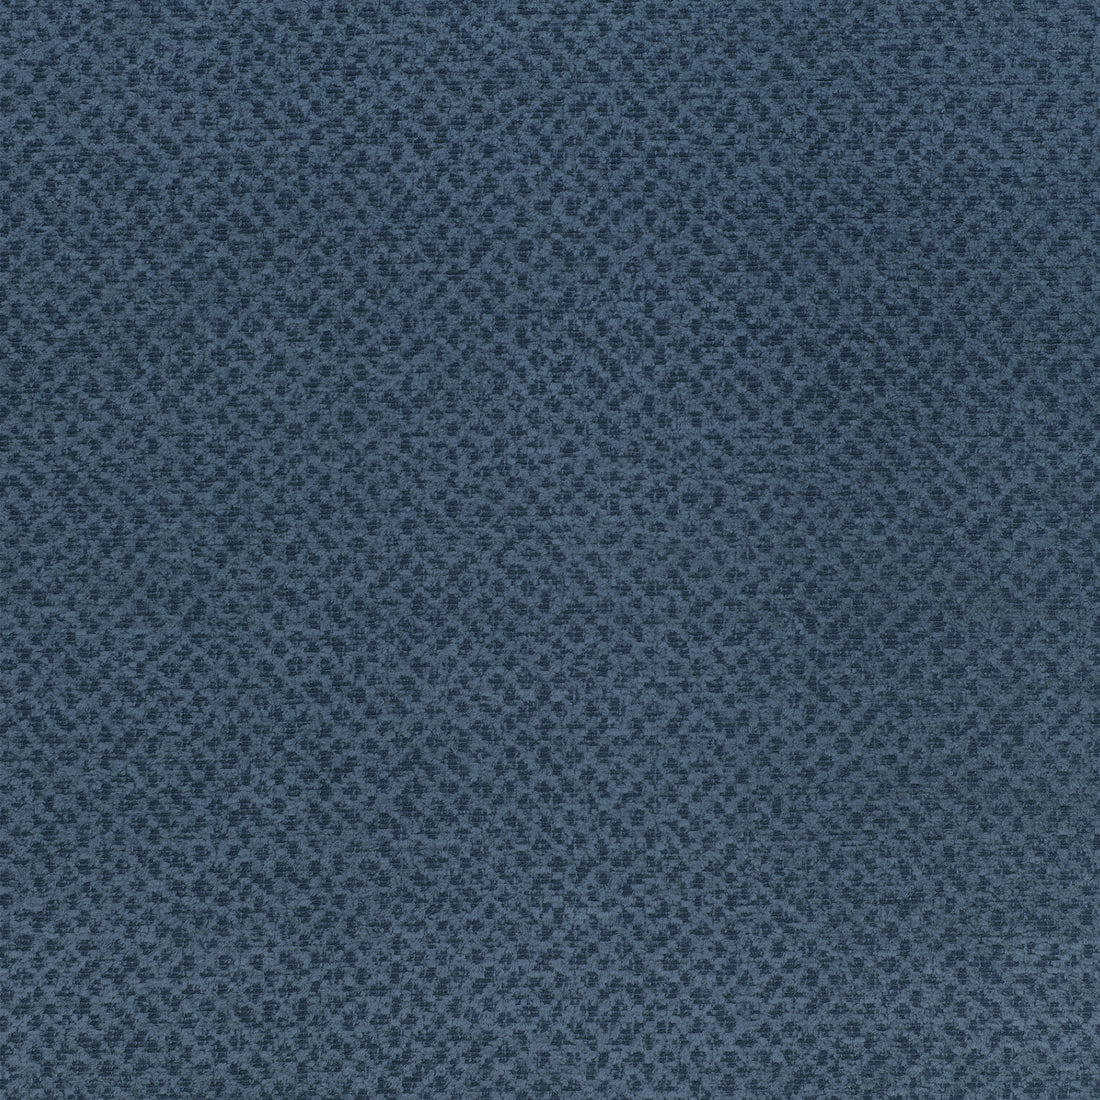 Gryffin fabric in navy color - pattern number W80413 - by Thibaut in the Mosaic collection